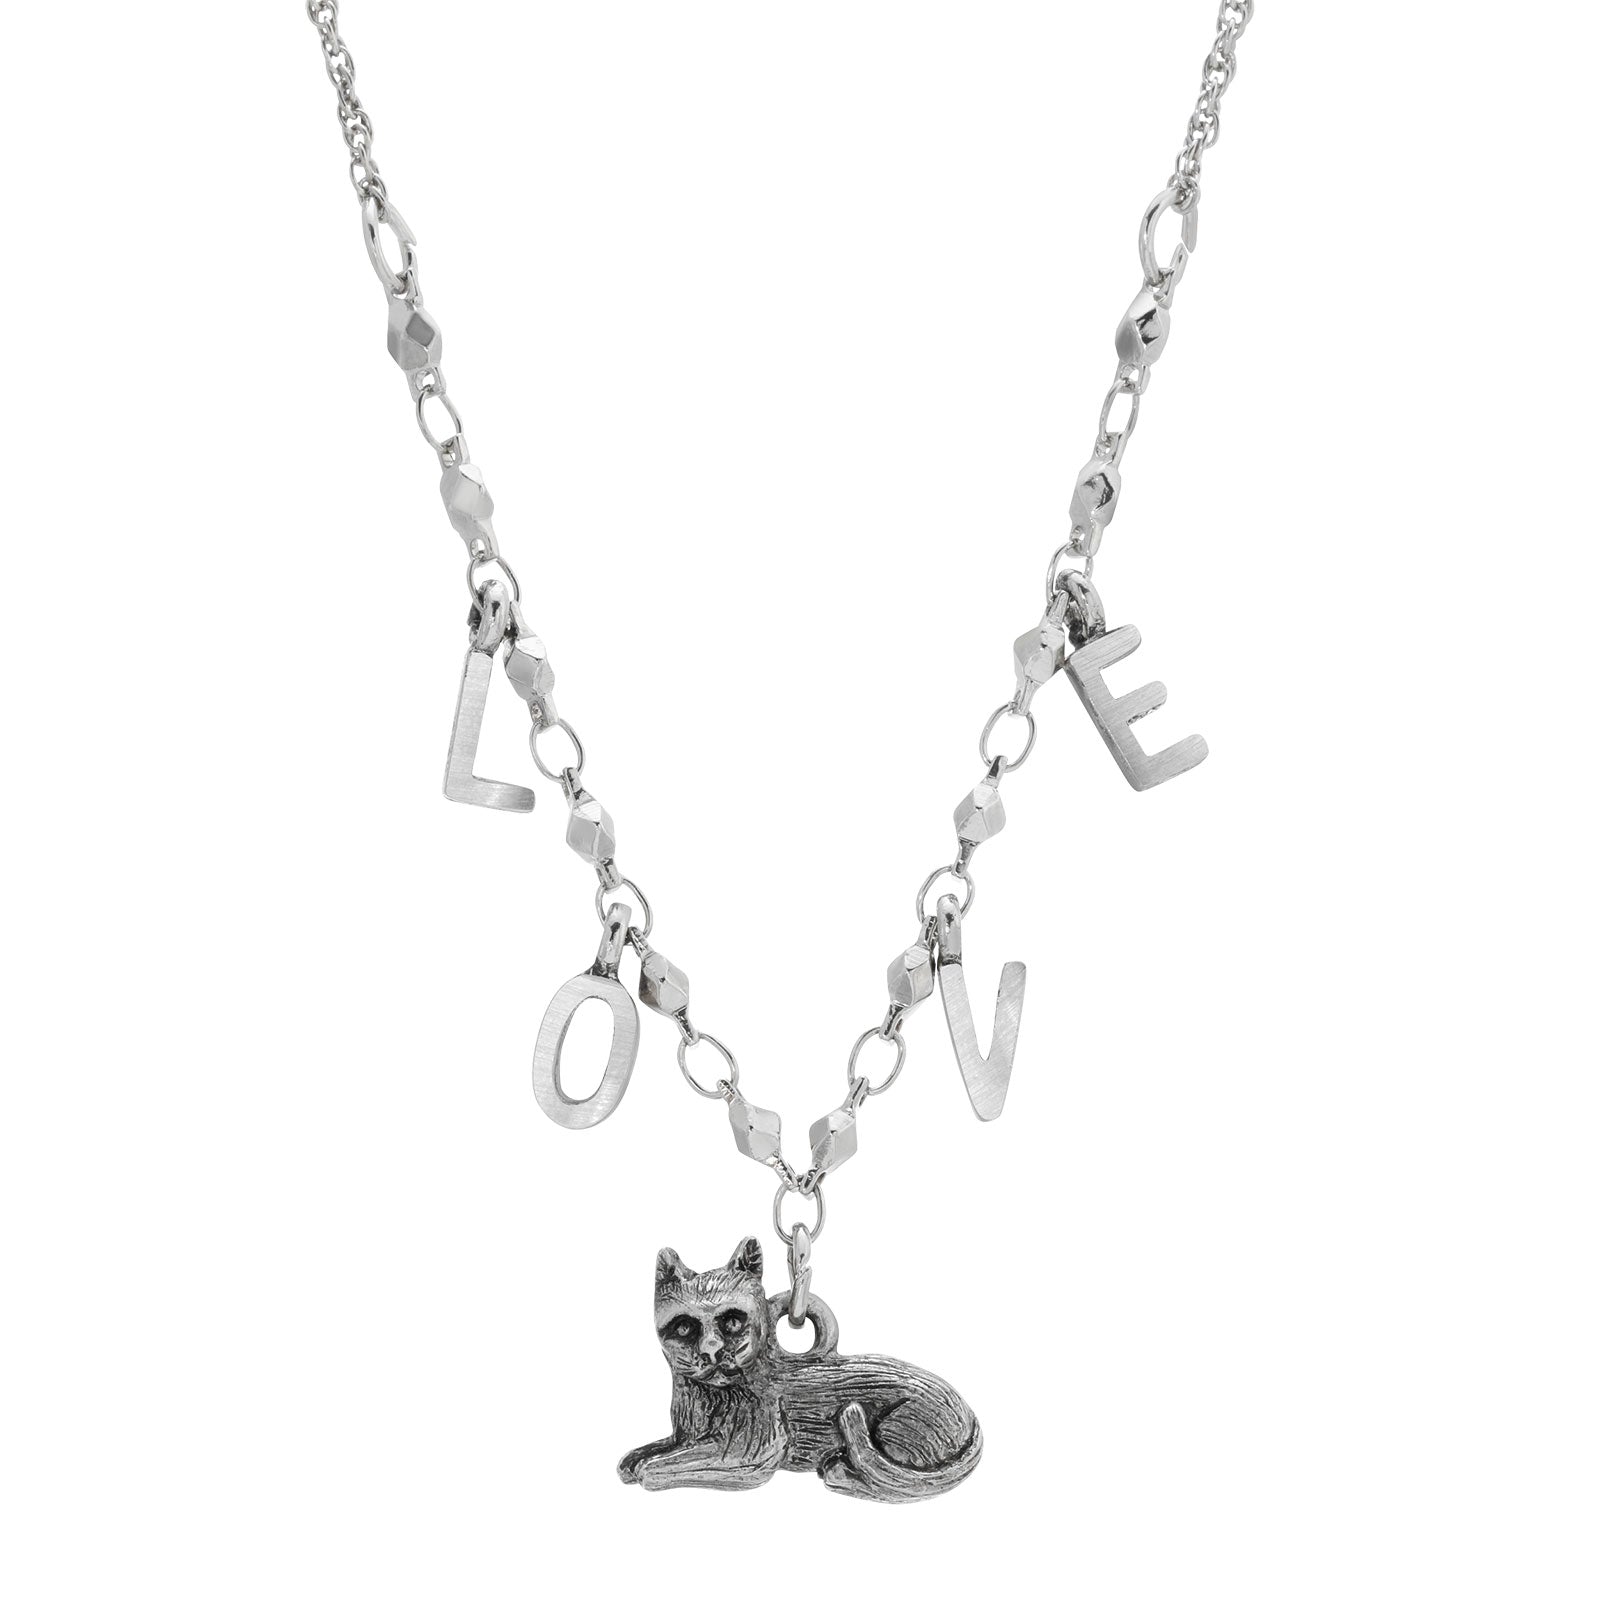 PEWTER AND SILVER TONE CAT WITH LOVE INITIALS NECKLACE 16 INCHES